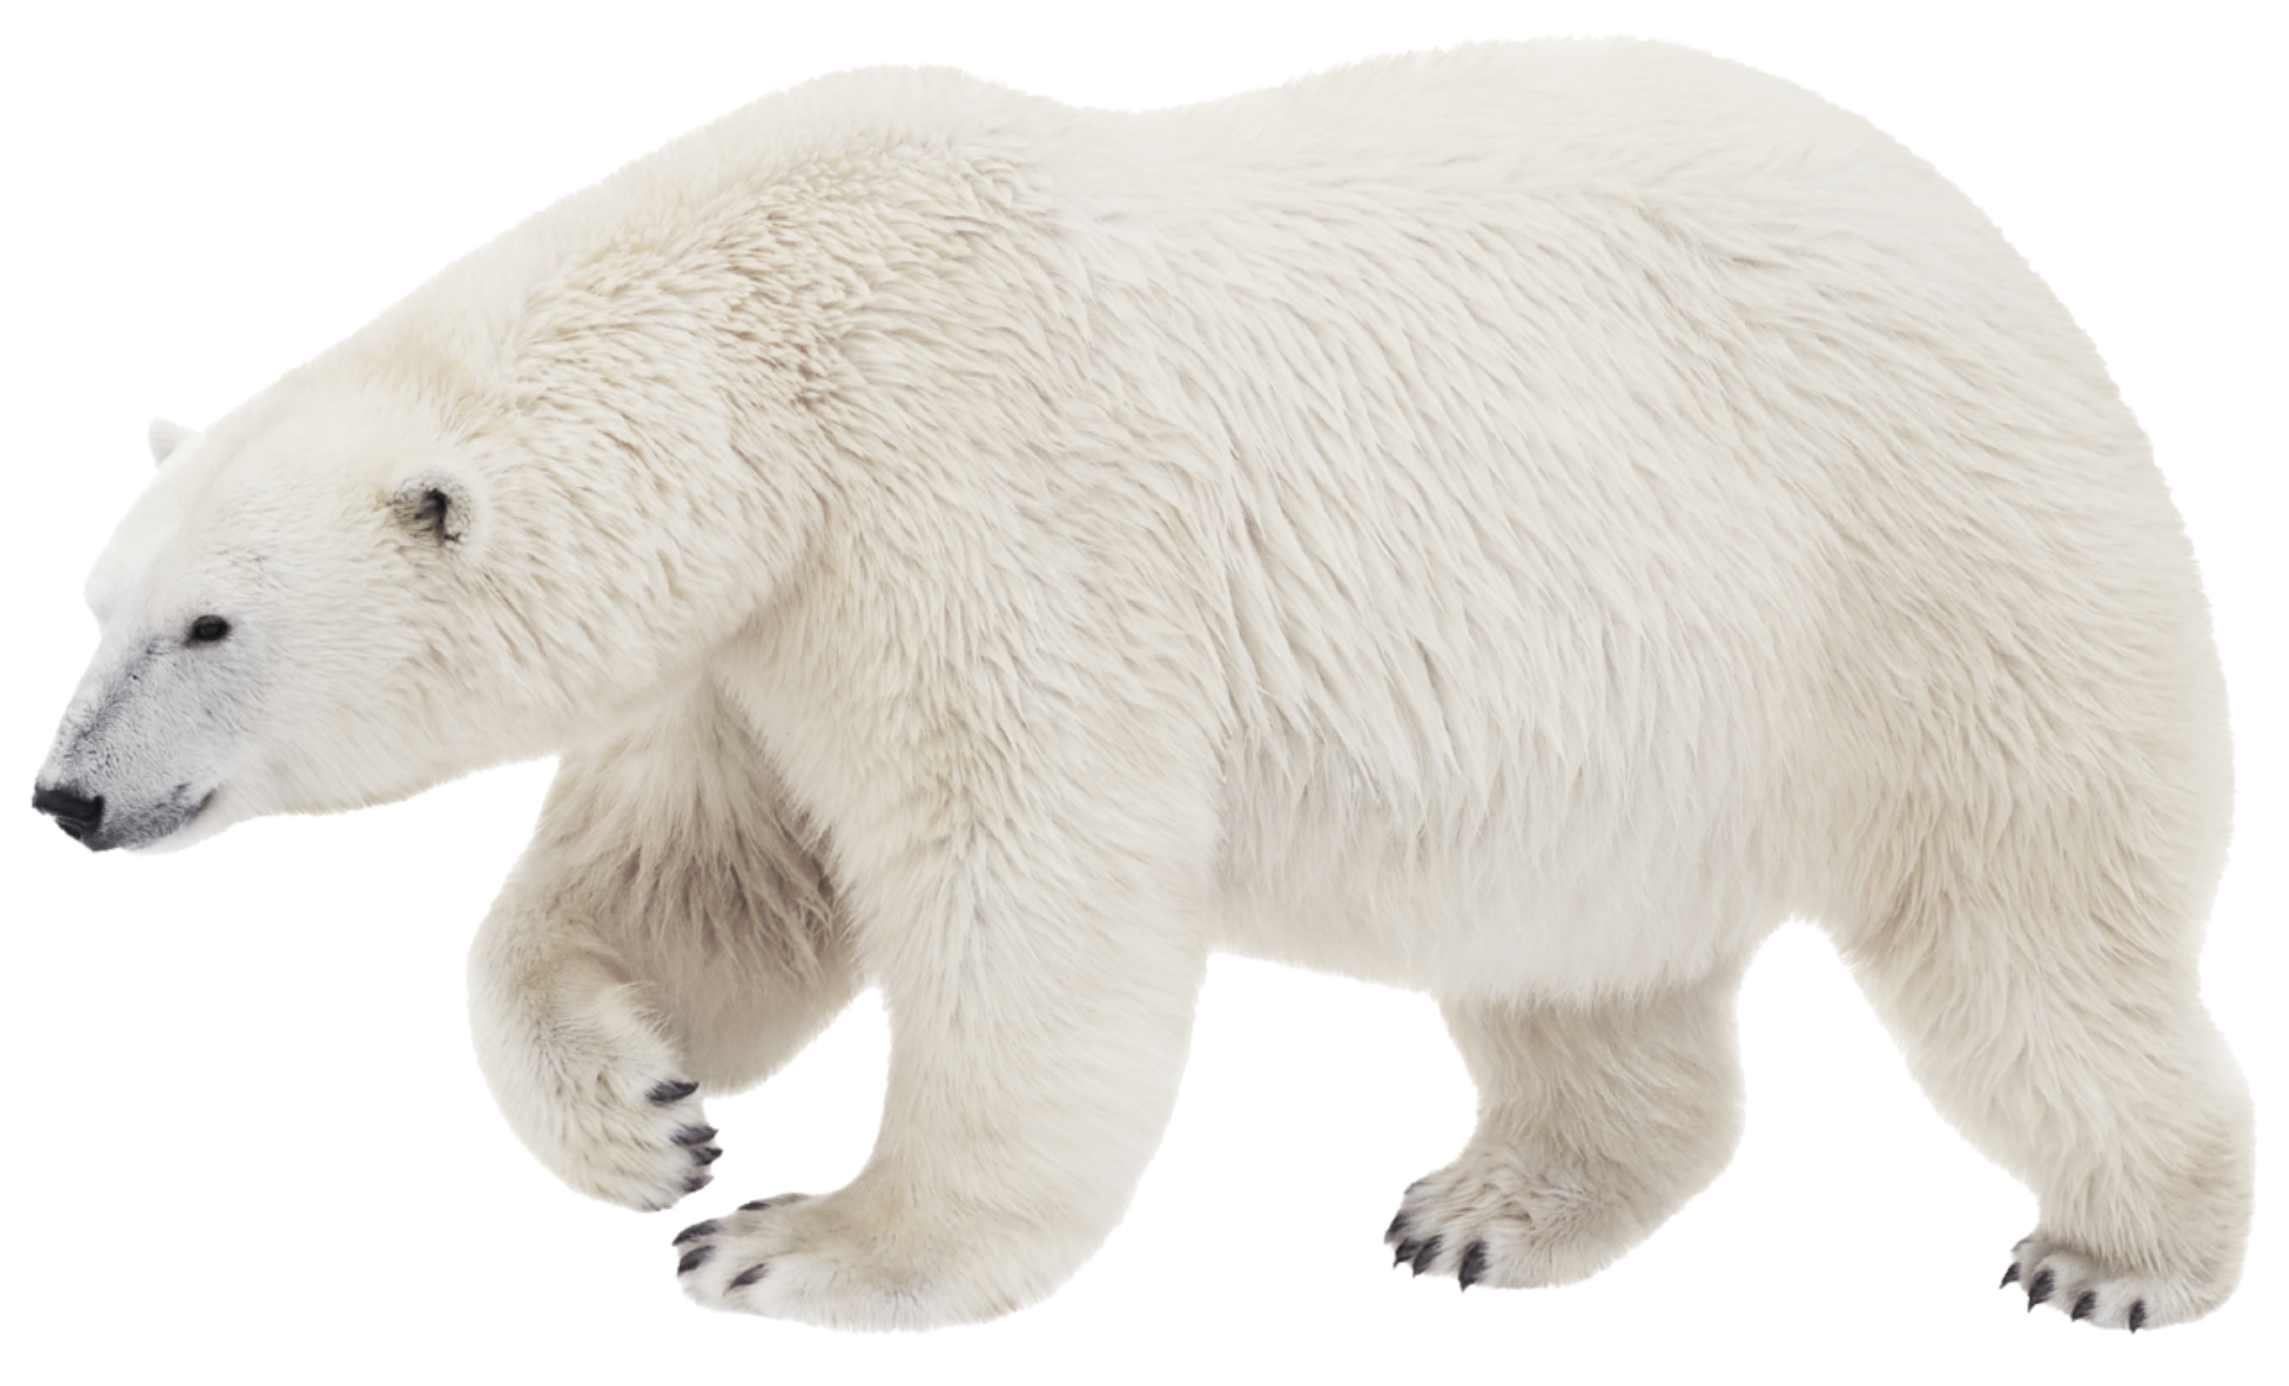 0 Result Images of Polar Bear Png Cartoon - PNG Image Collection